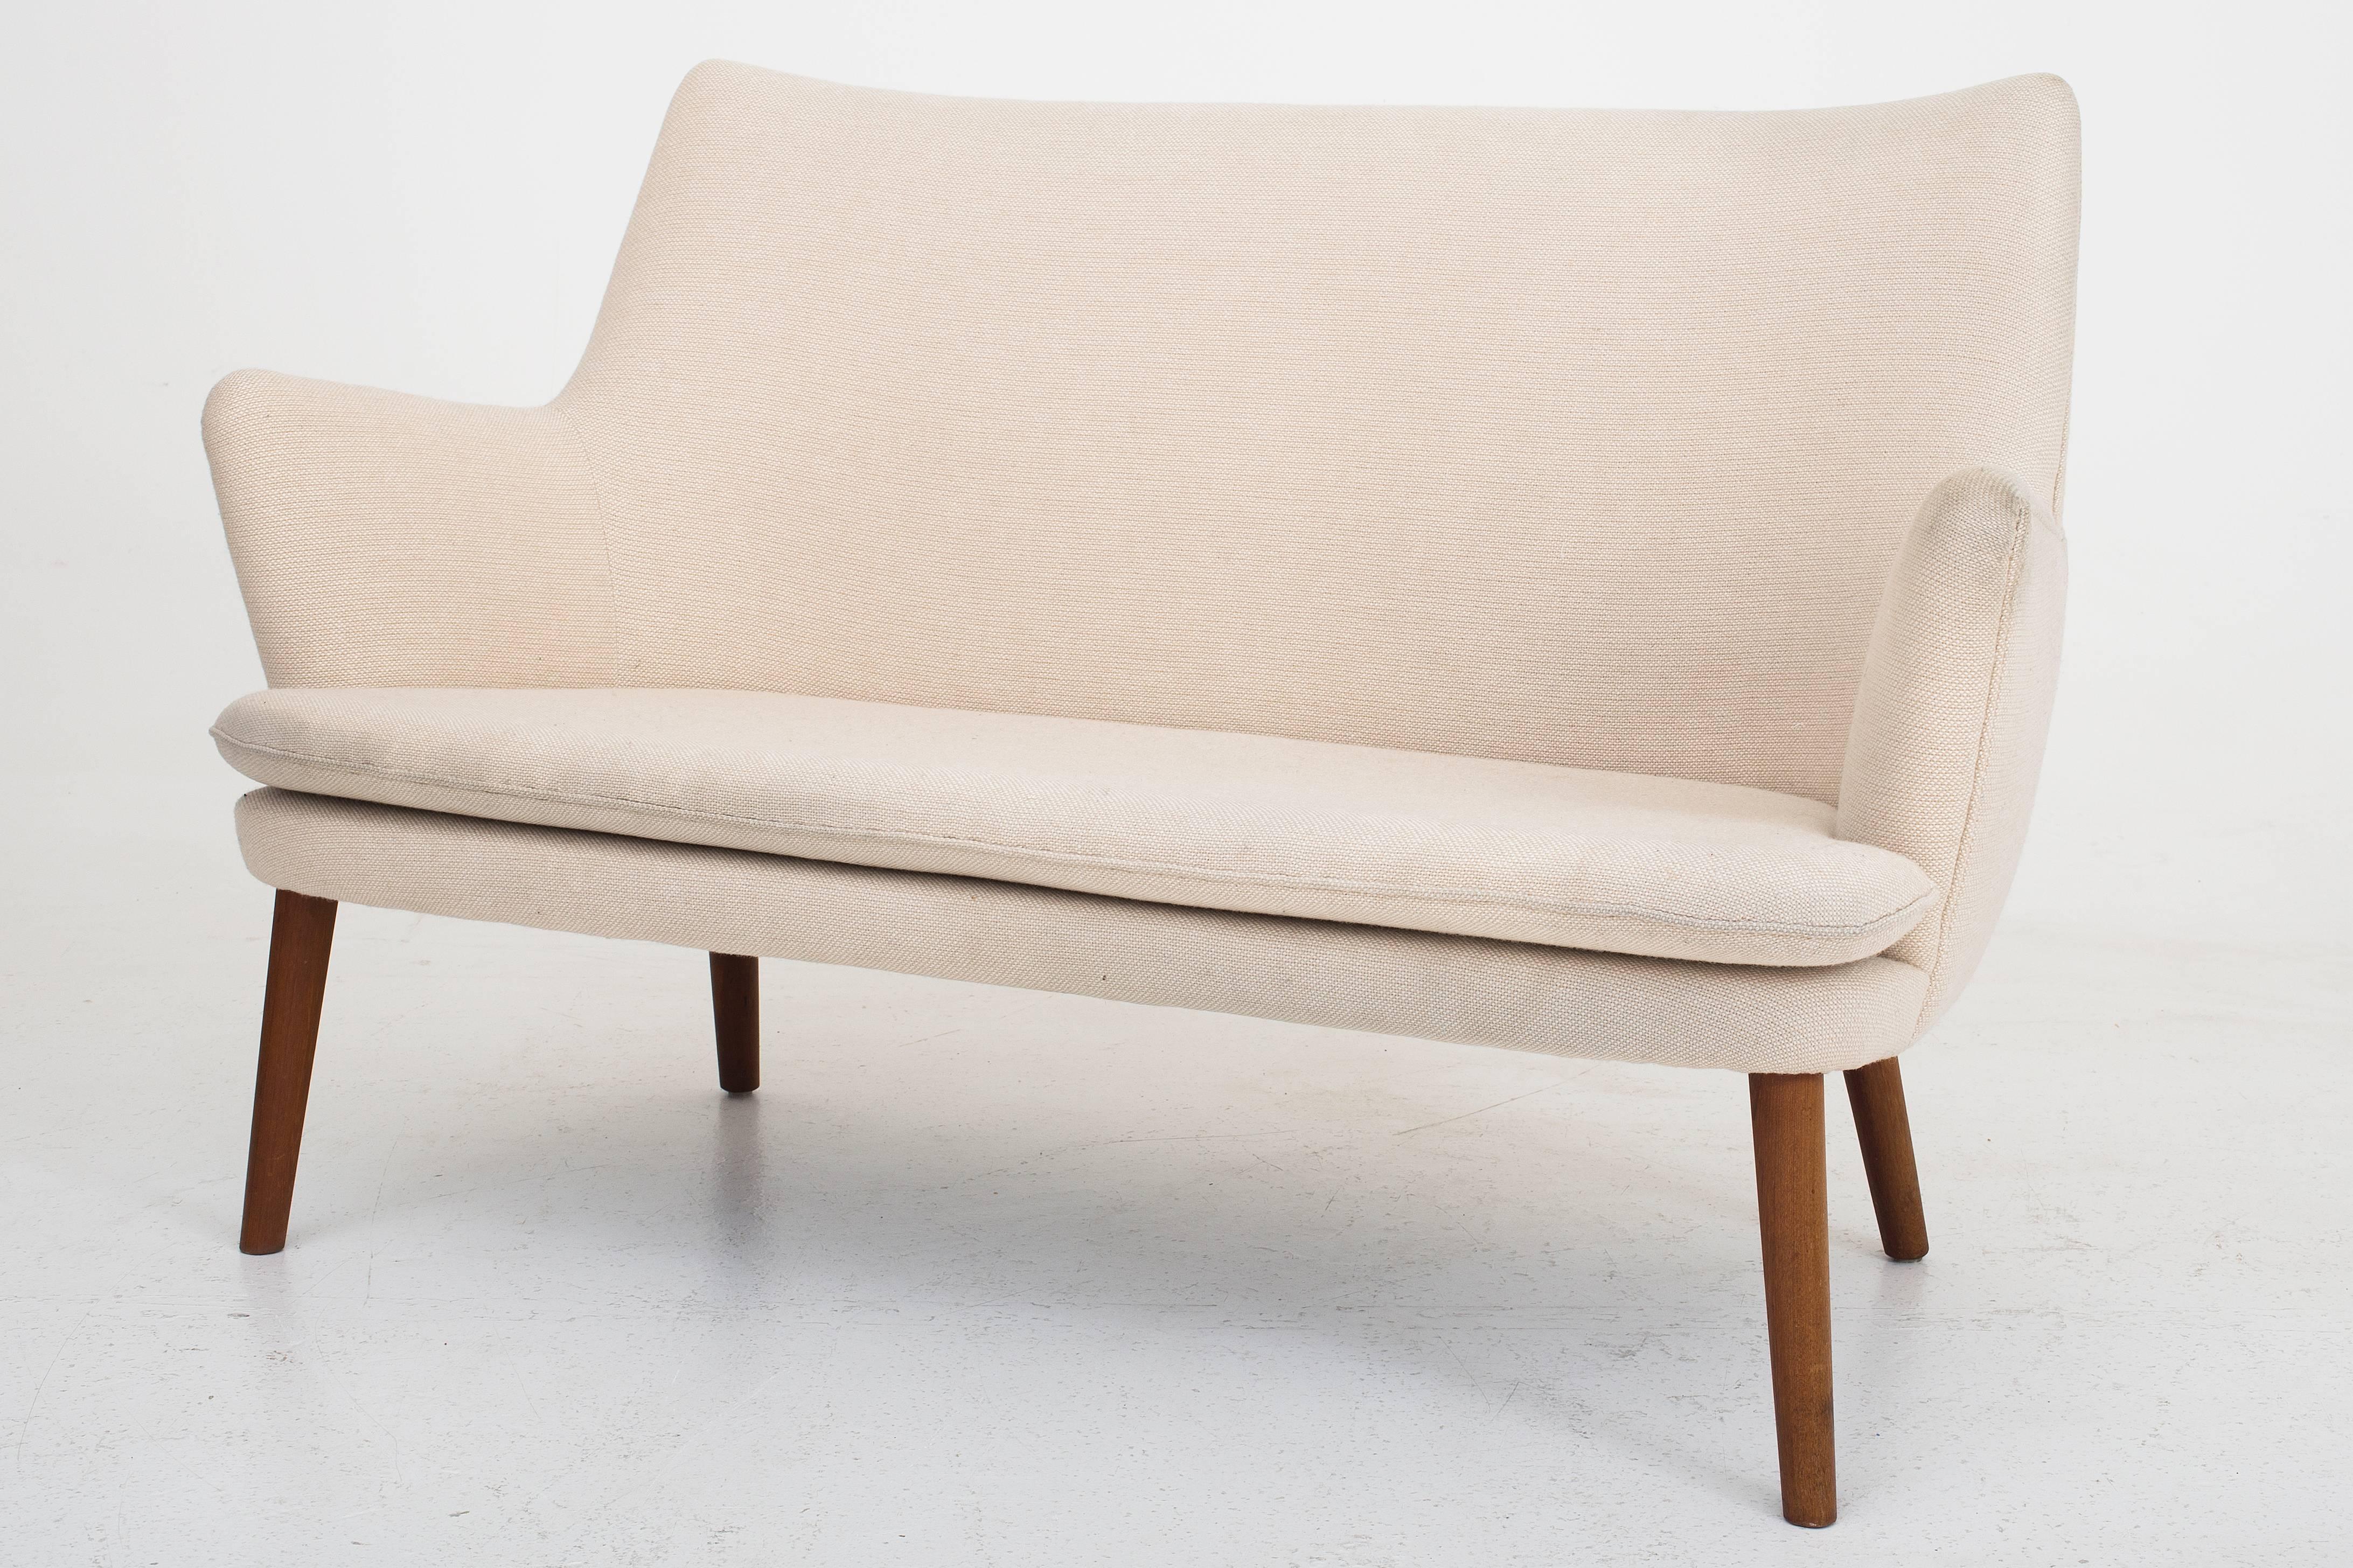 Two-seat sofa with original white cream colored fabric and legs in teak. Model AP 20. Manufactured by AP Stolen, Denmark.